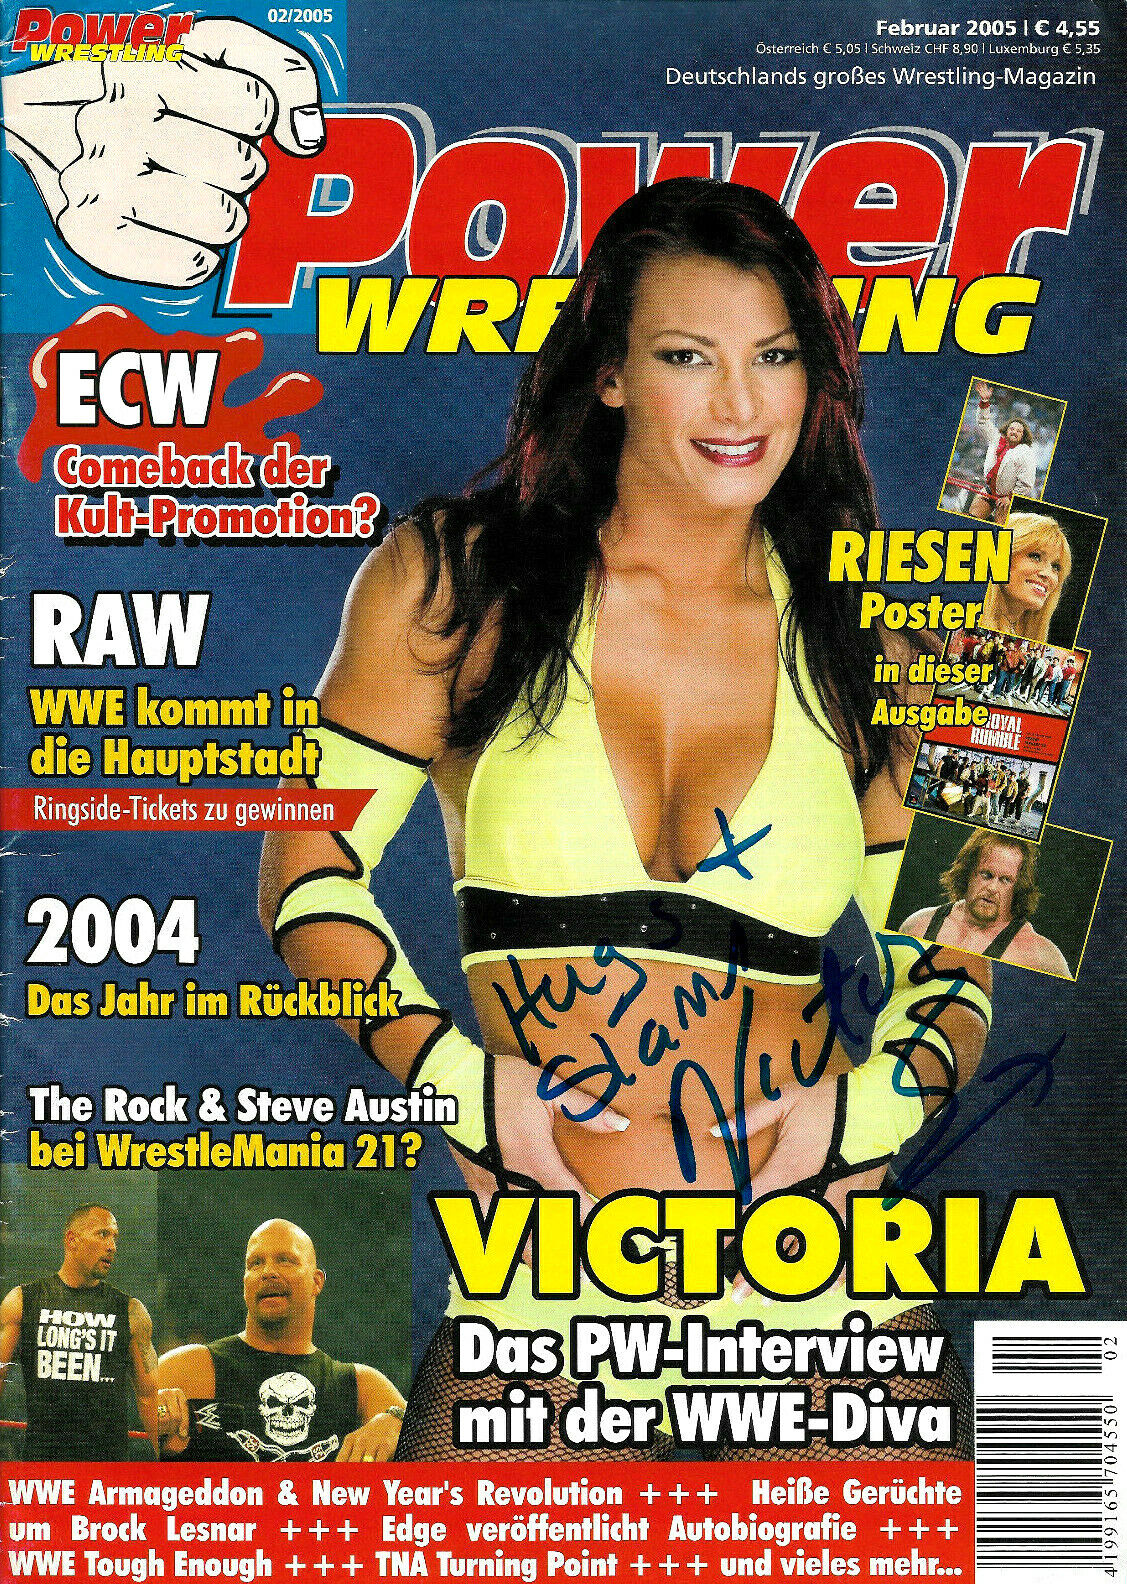 WWE VICTORIA HAND SIGNED AUTOGRAPHED POWER WRESTLING INSCRIBED MAGAZINE WITH COA